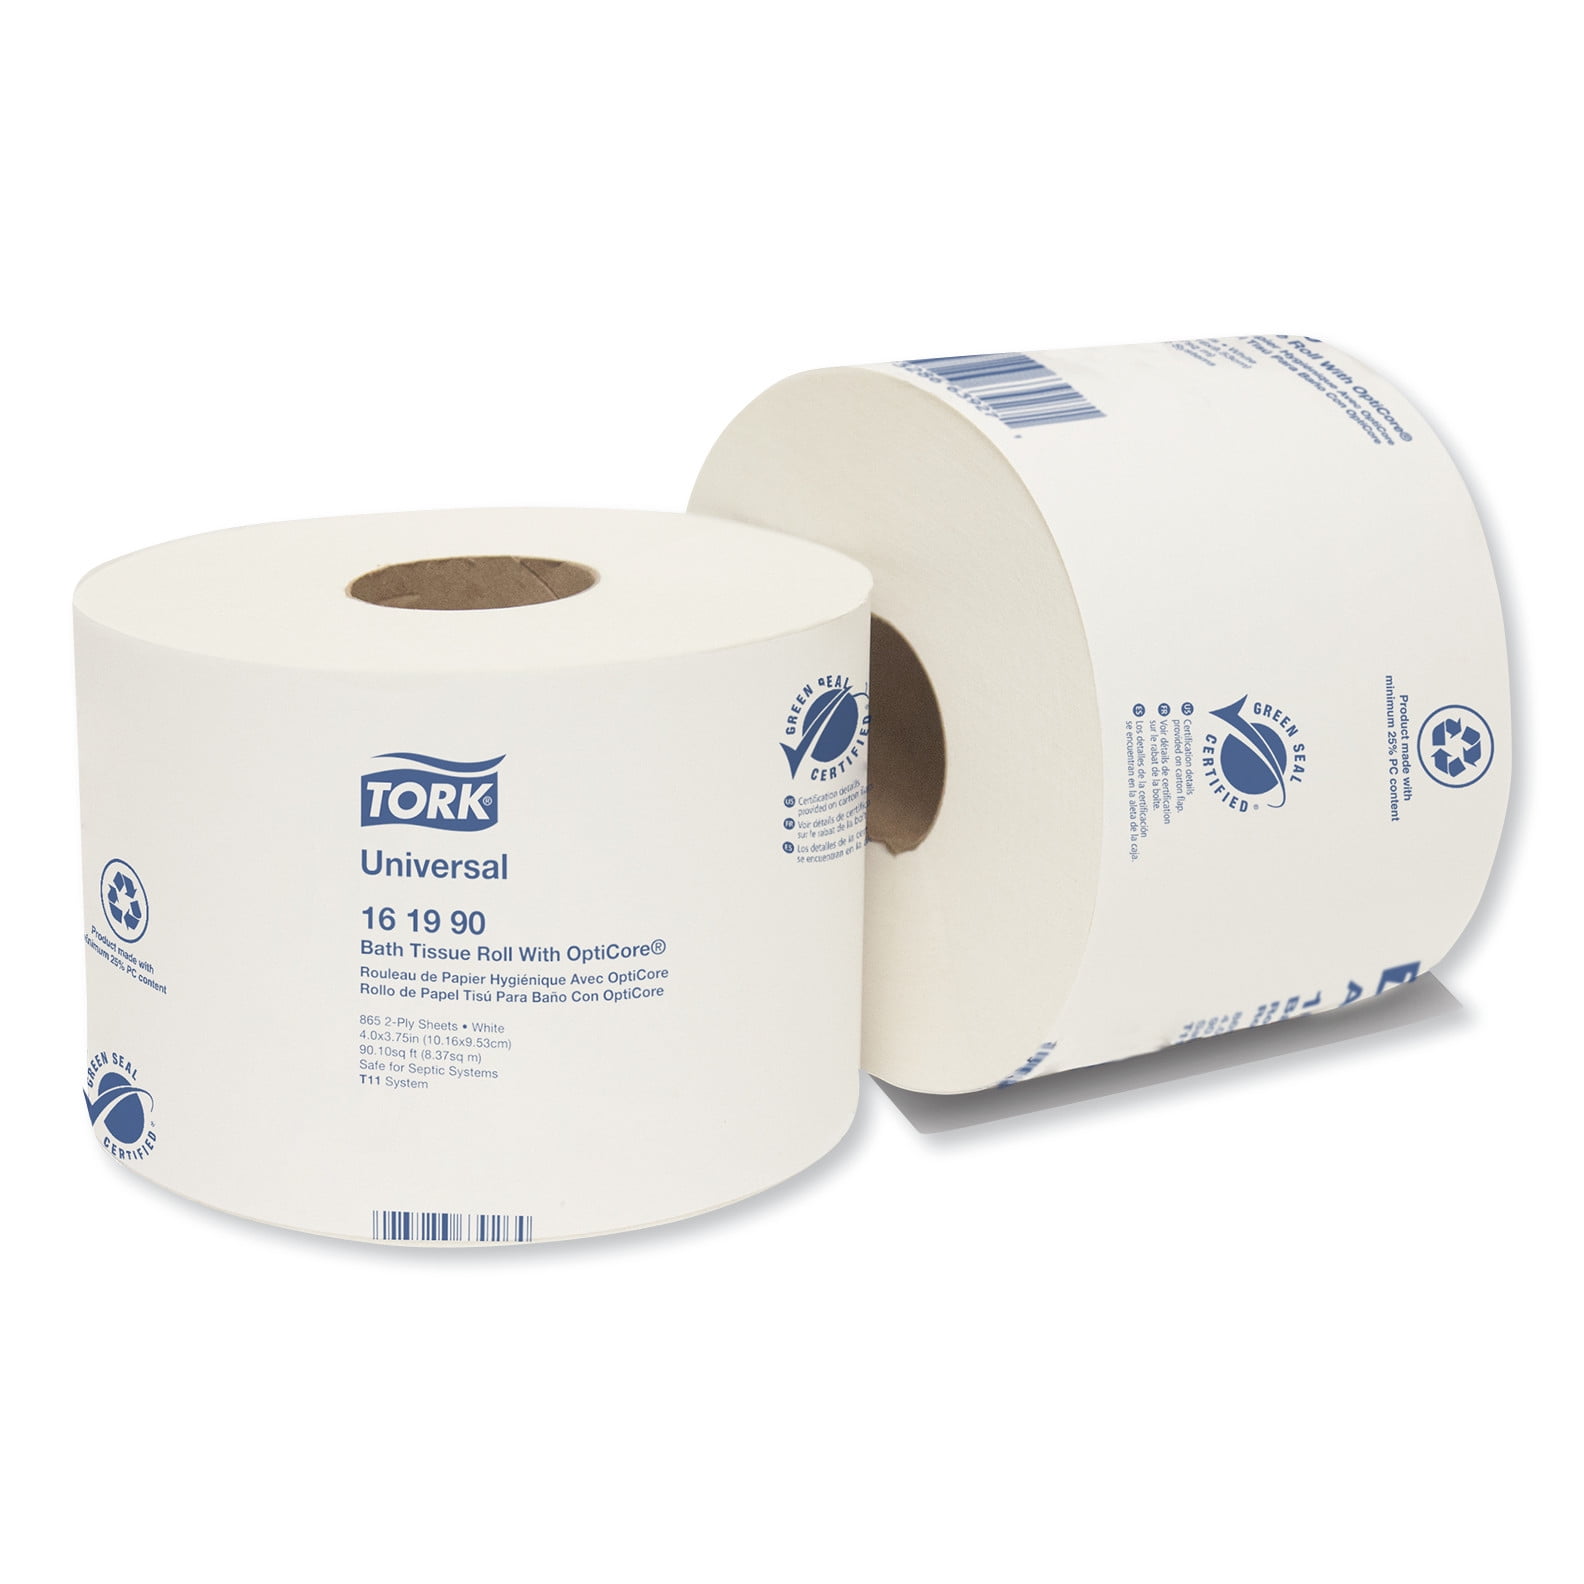 Case of 36 Rolls, 865 Sheets per Roll, 31,140 Sheets per Case Tork 162090 Advanced Bath Tissue Roll with OptiCore White 3.75 Width x 4.0 Length 2-Ply